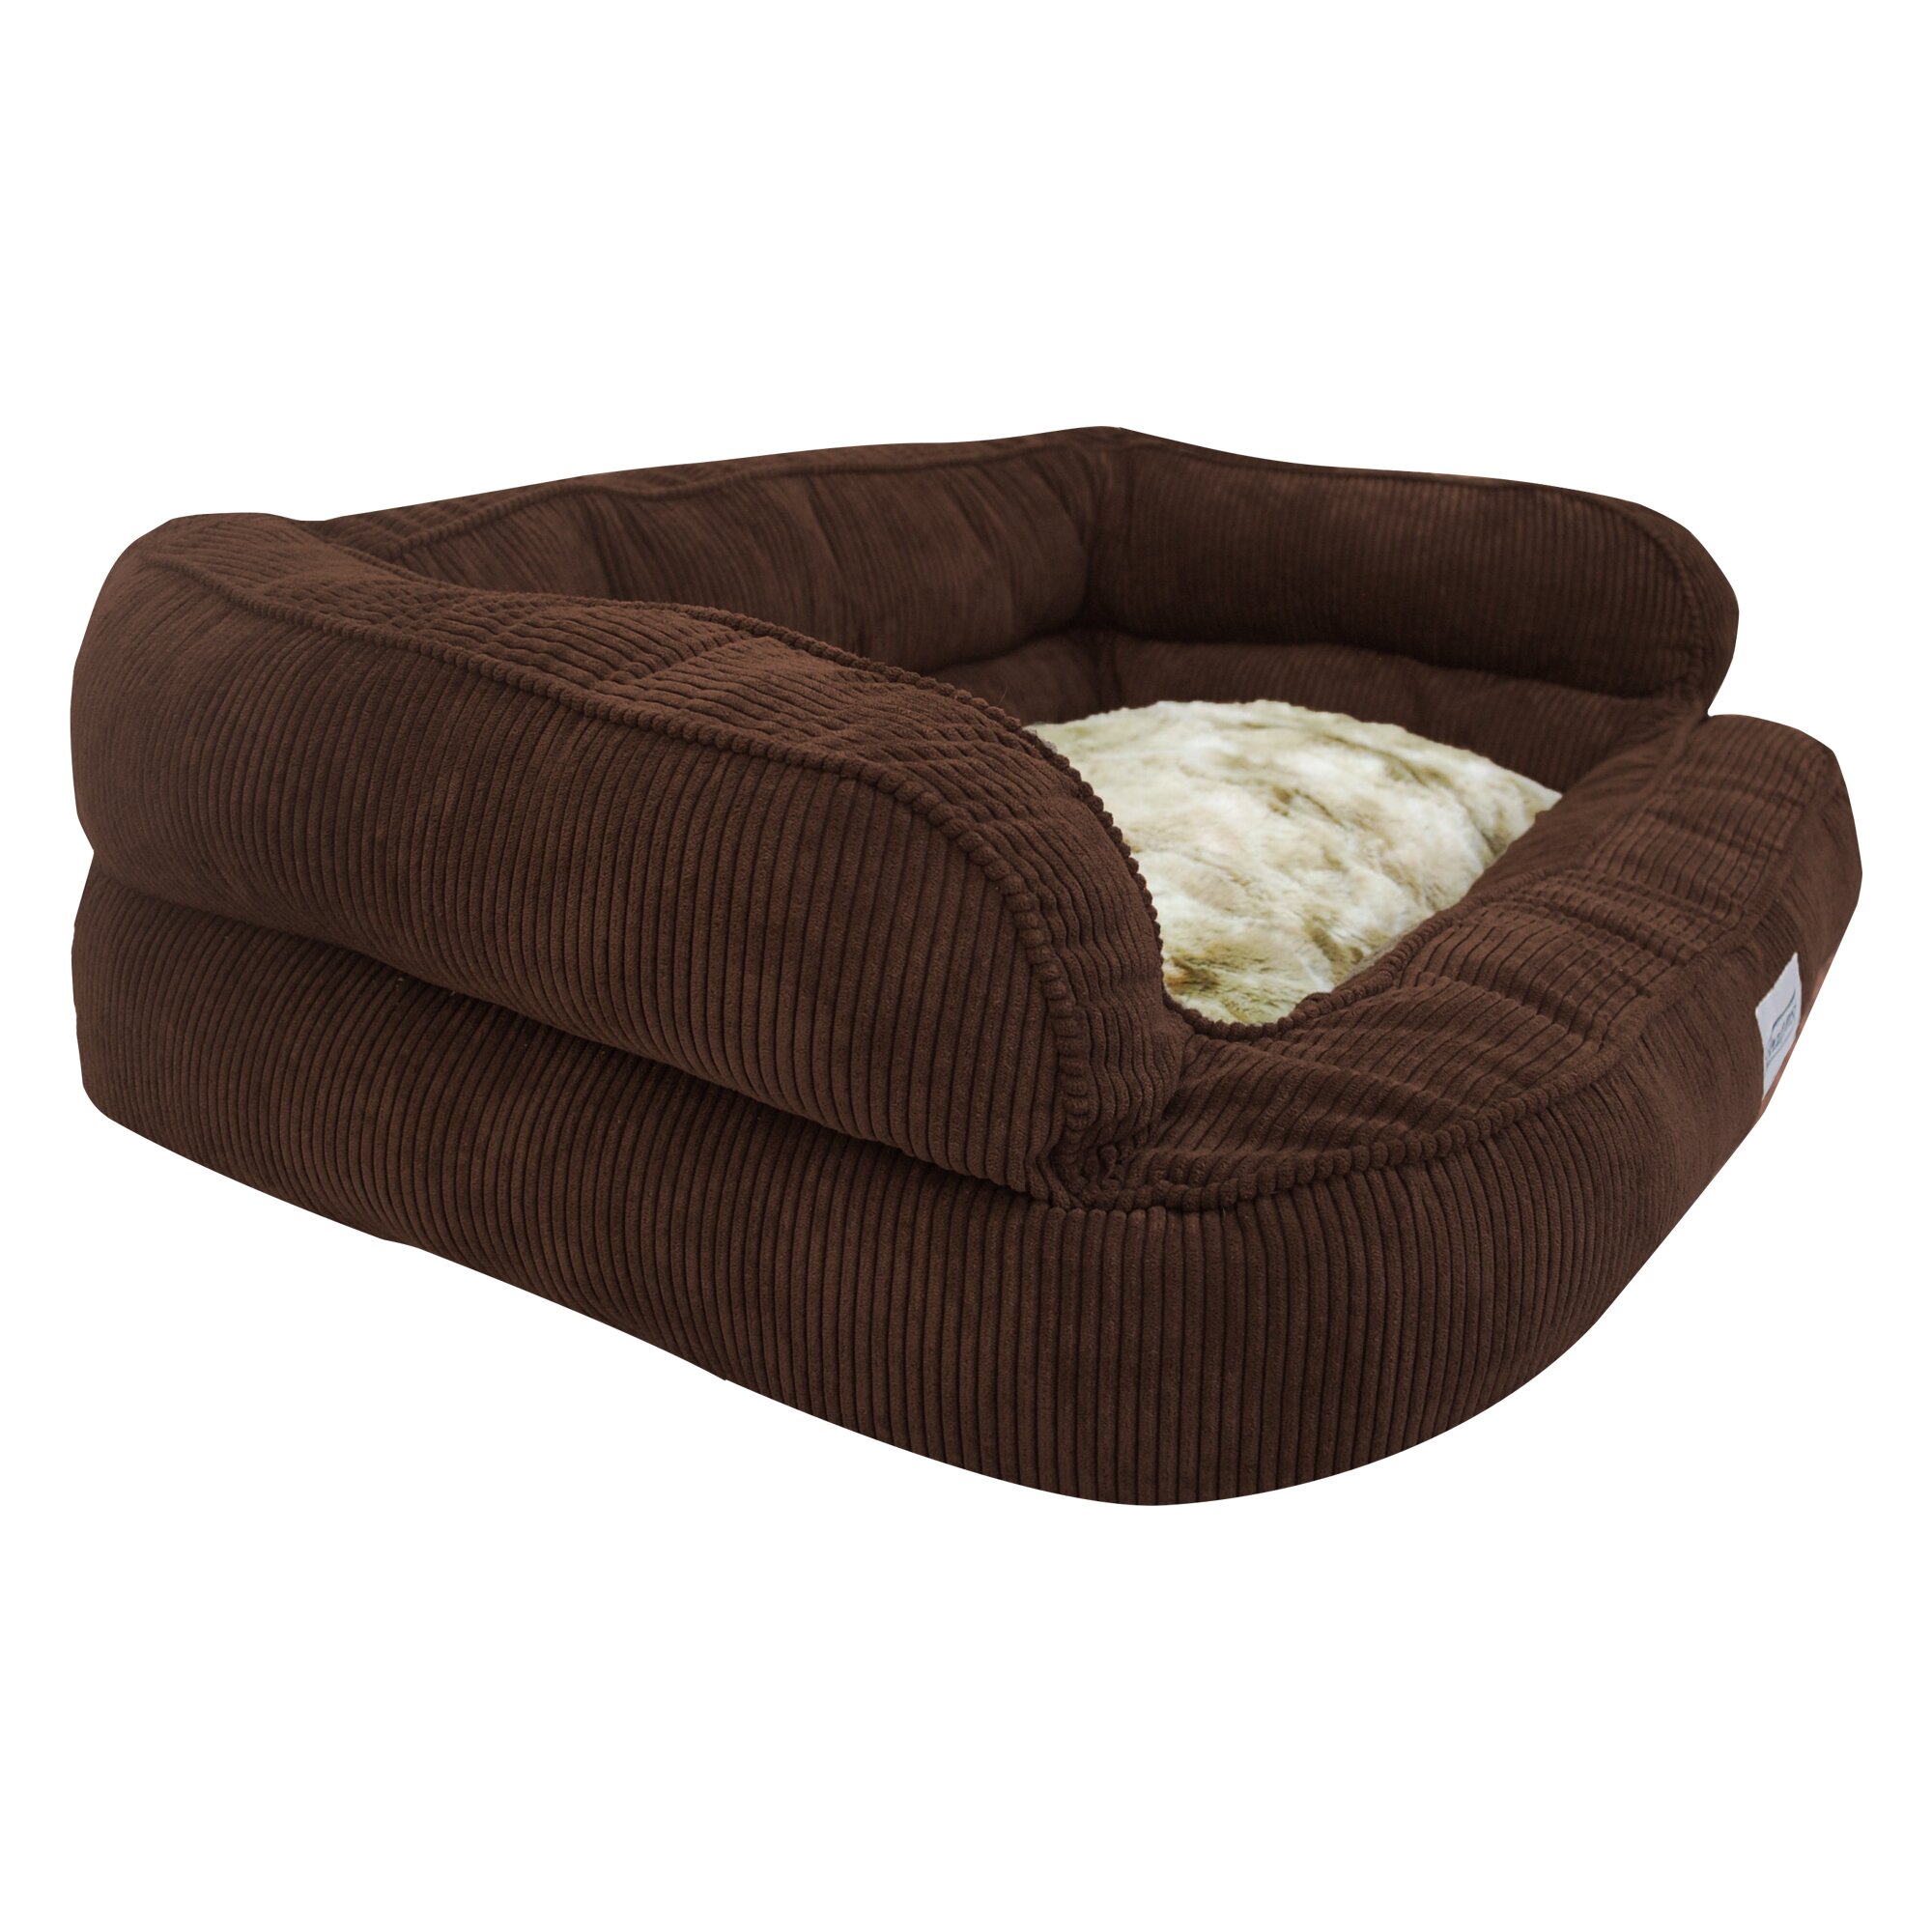 Beautyrest Colossal Rest Large Corduroy Dog Bed